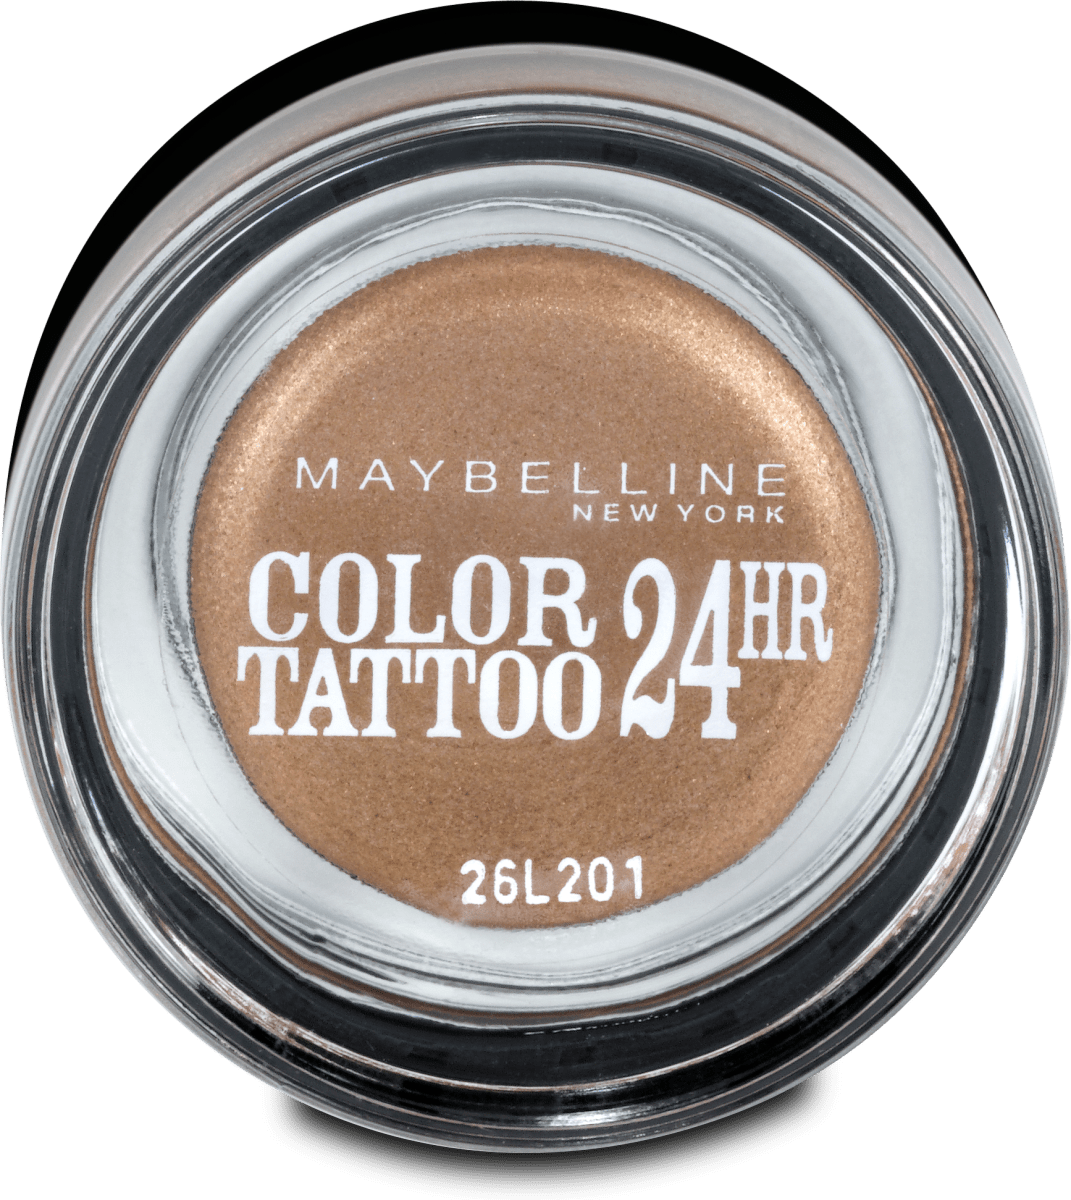 Maybelline On Lidschatten Tattoo Bronze, Color On York ml And New 35 3,5 24hr